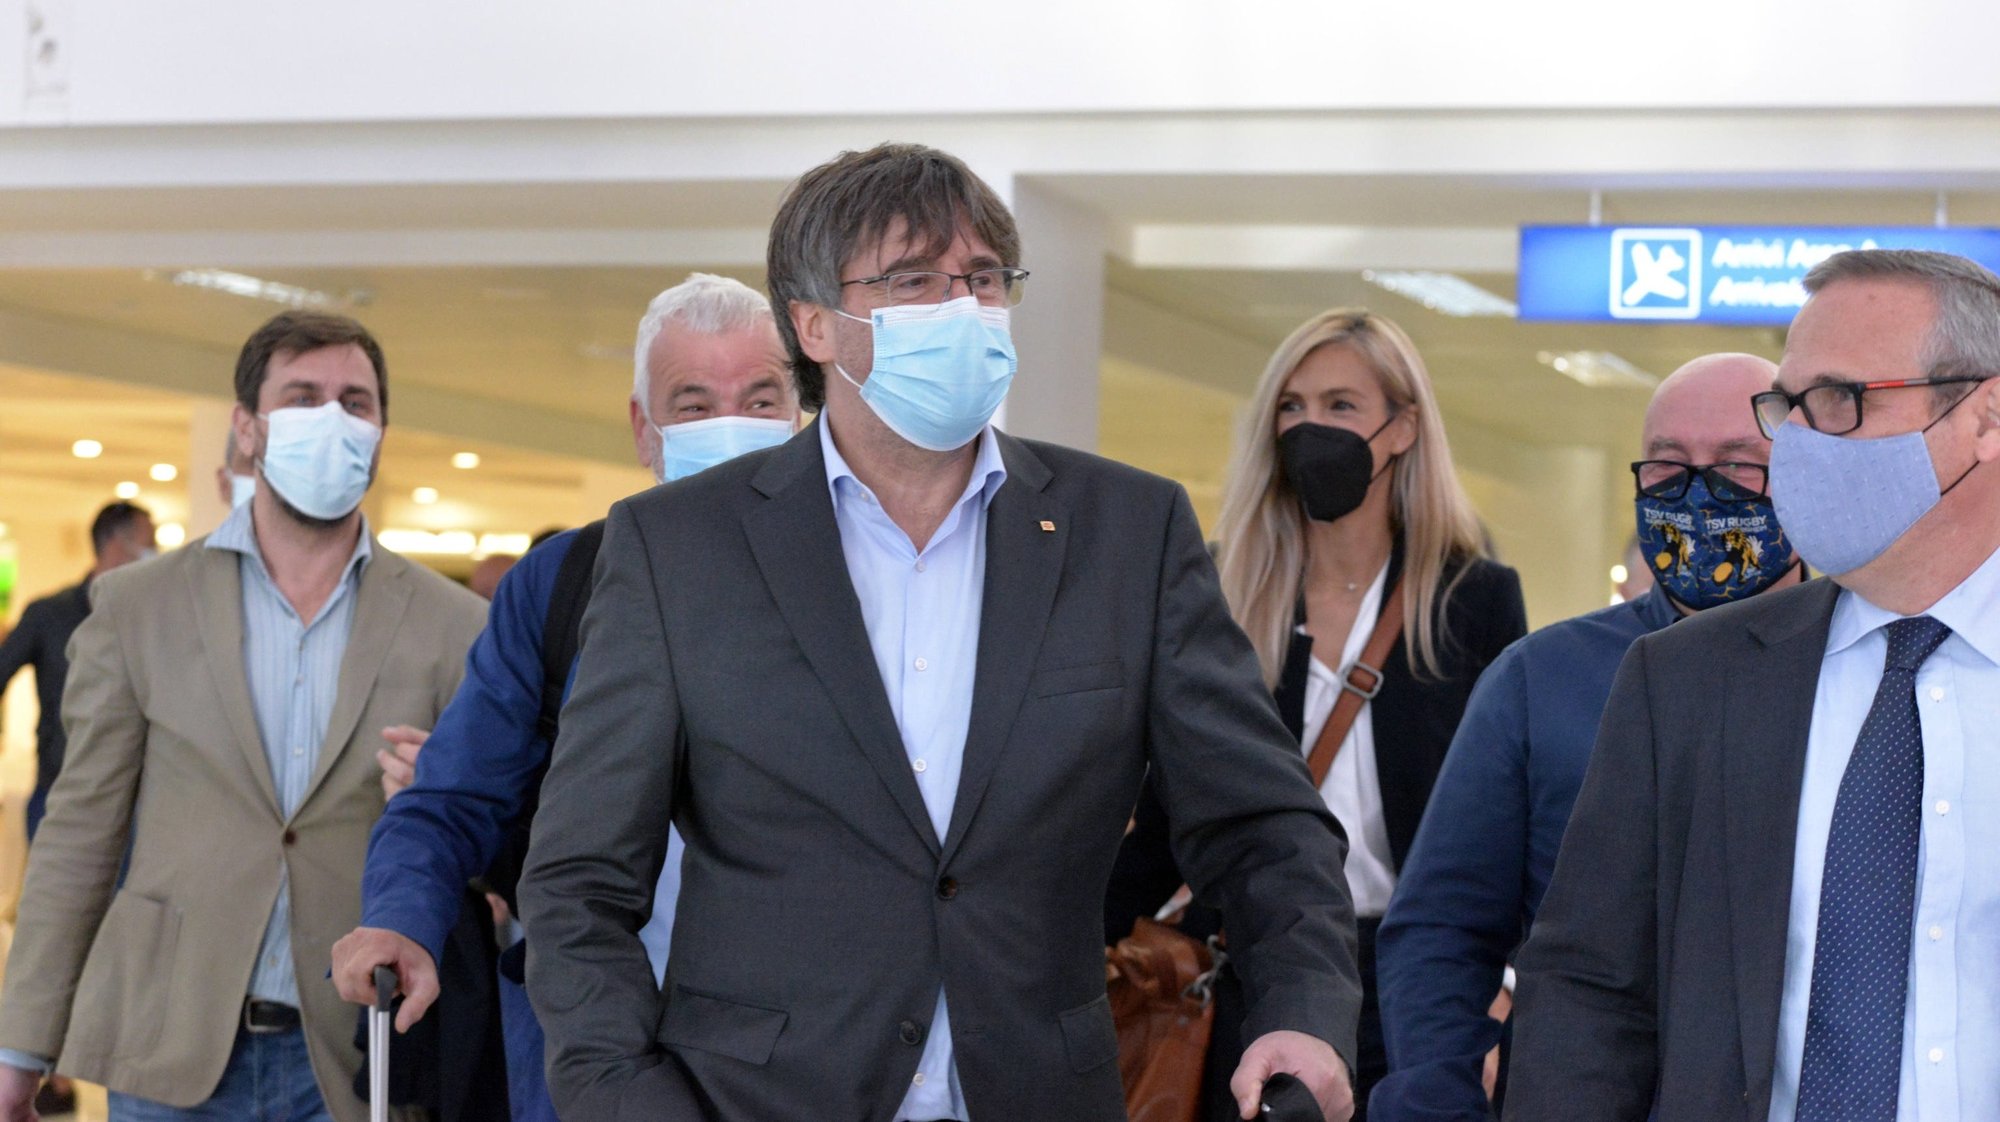 epa09502949 Exiled former Catalan leader and member of European Parliament Carles Puigdemont flanked by his lawyer Gonzalo Boje arrive at Alghero airport in Alghero, Sardinia Island, Italy, 03 October 2021.  EPA/CLAUDIA SANCIUS